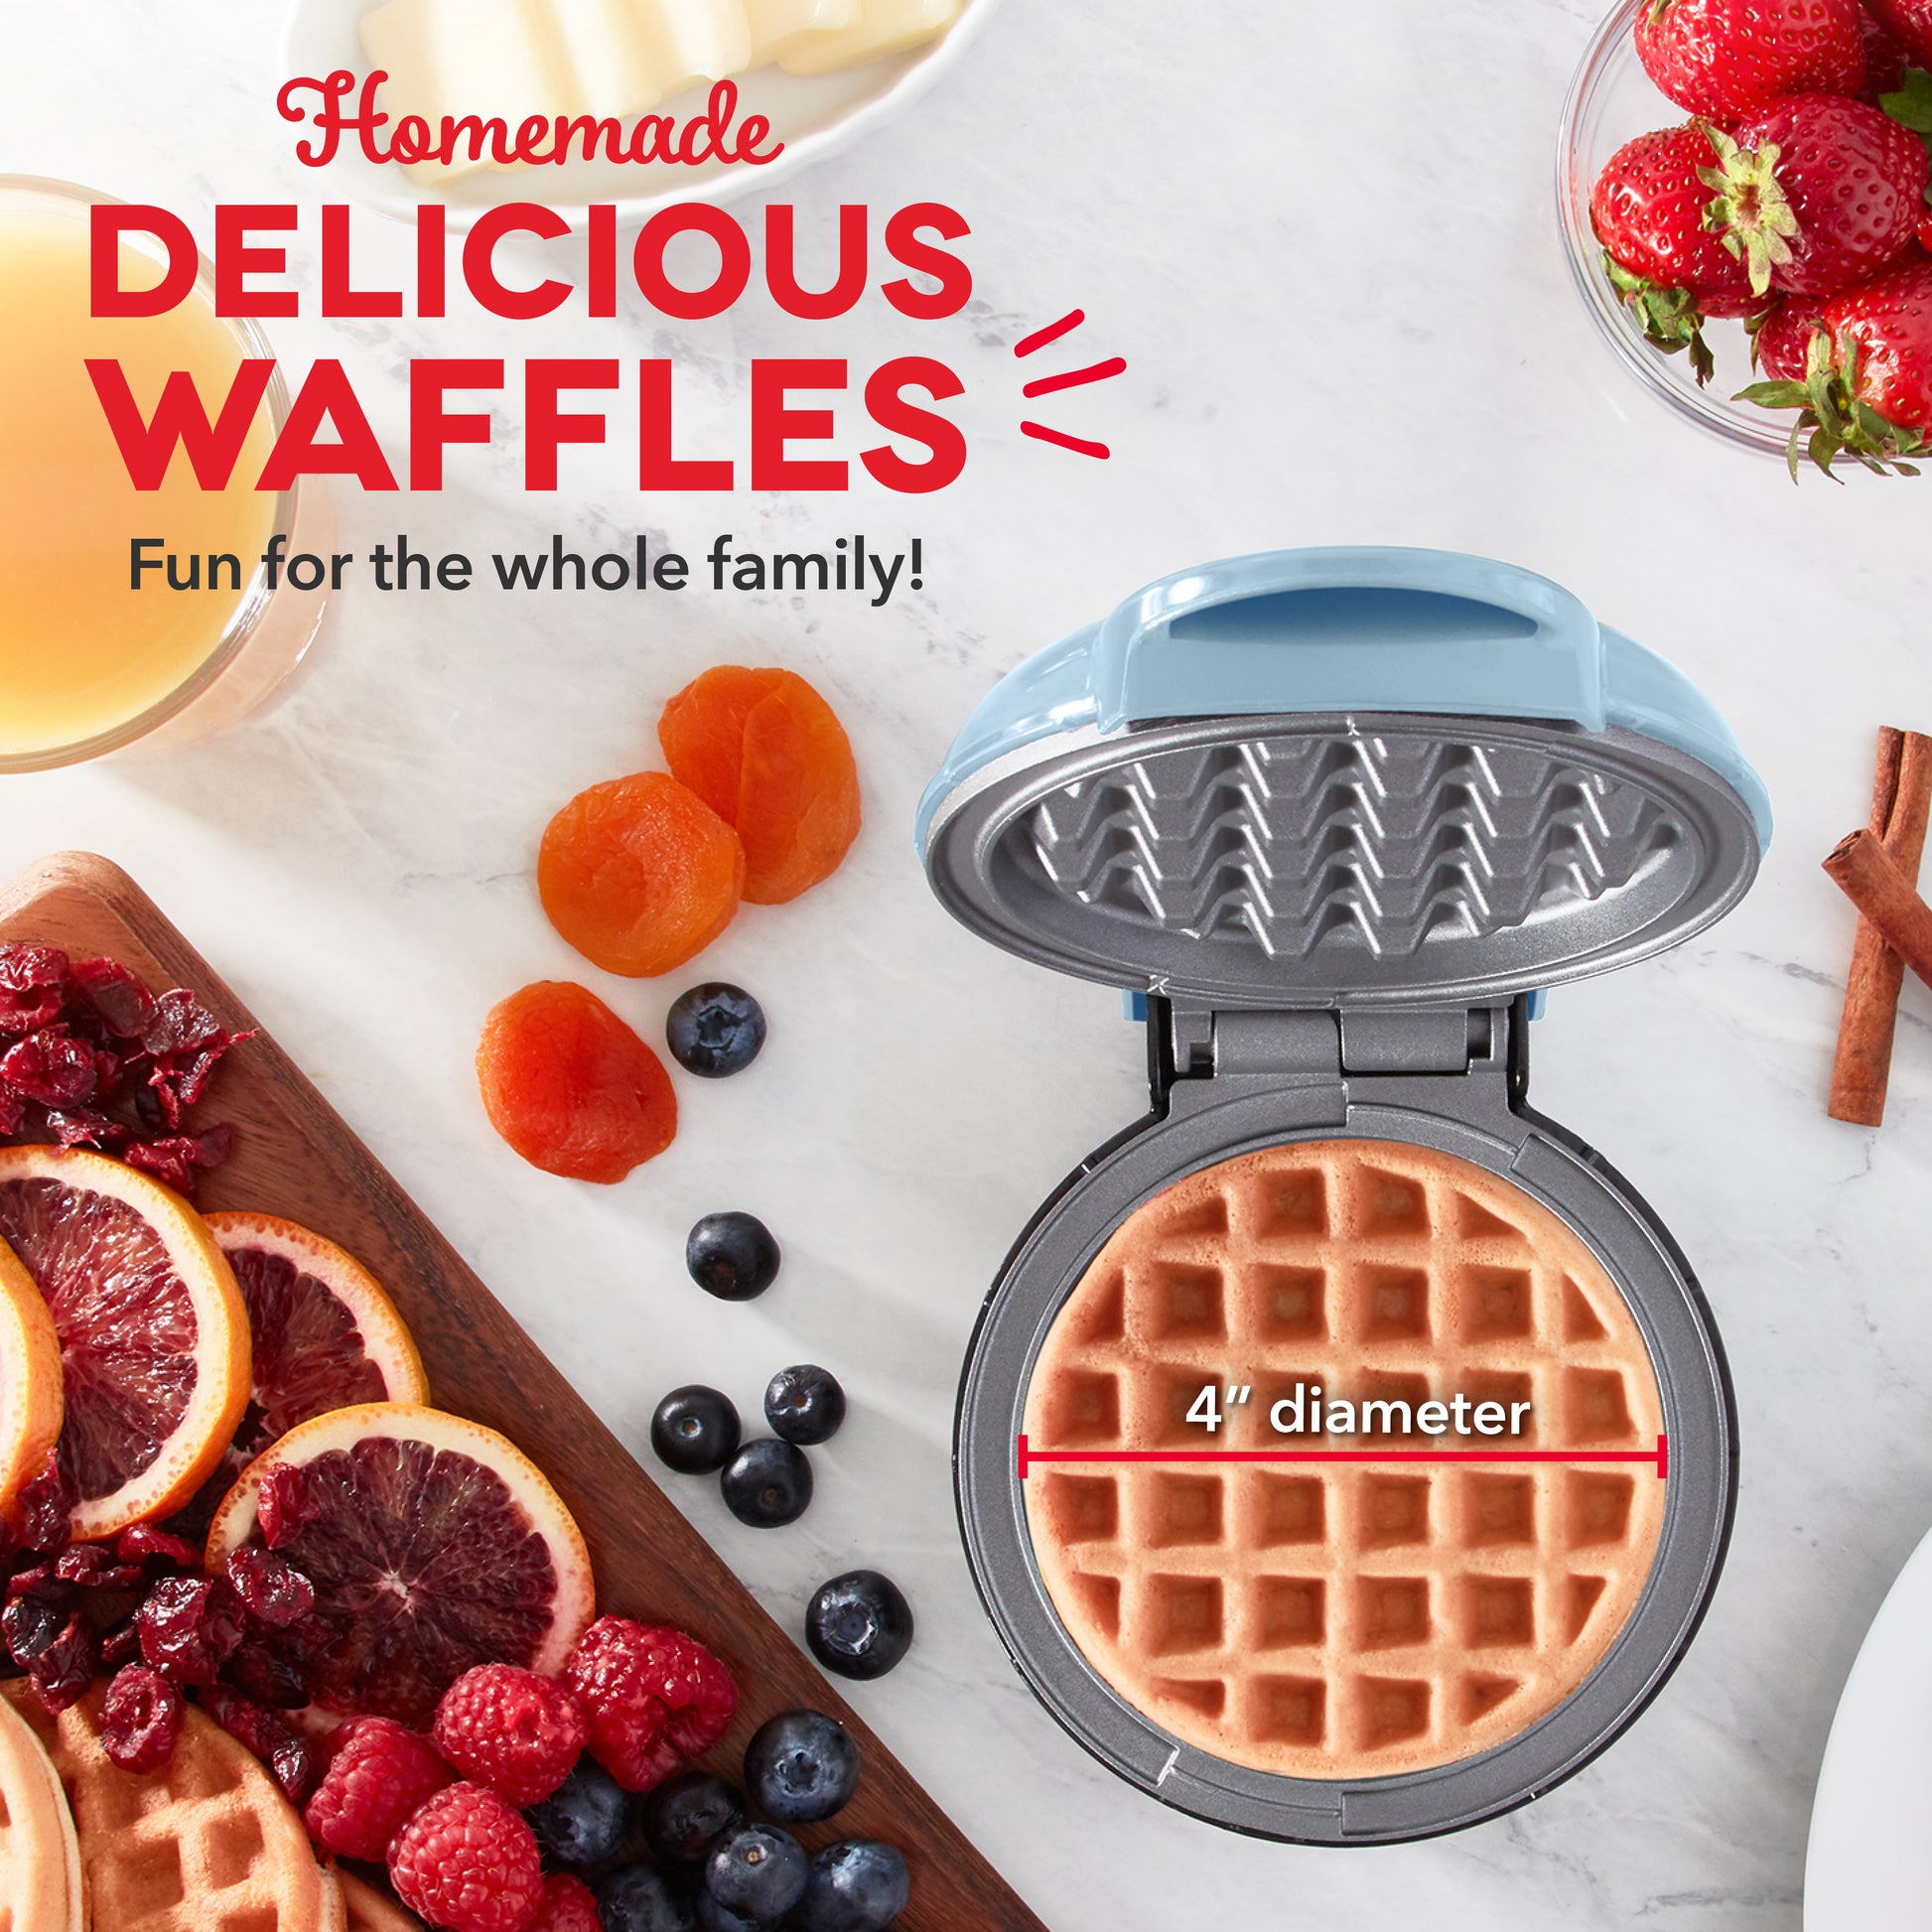 Dash Deluxe Waffle Bowl Maker 